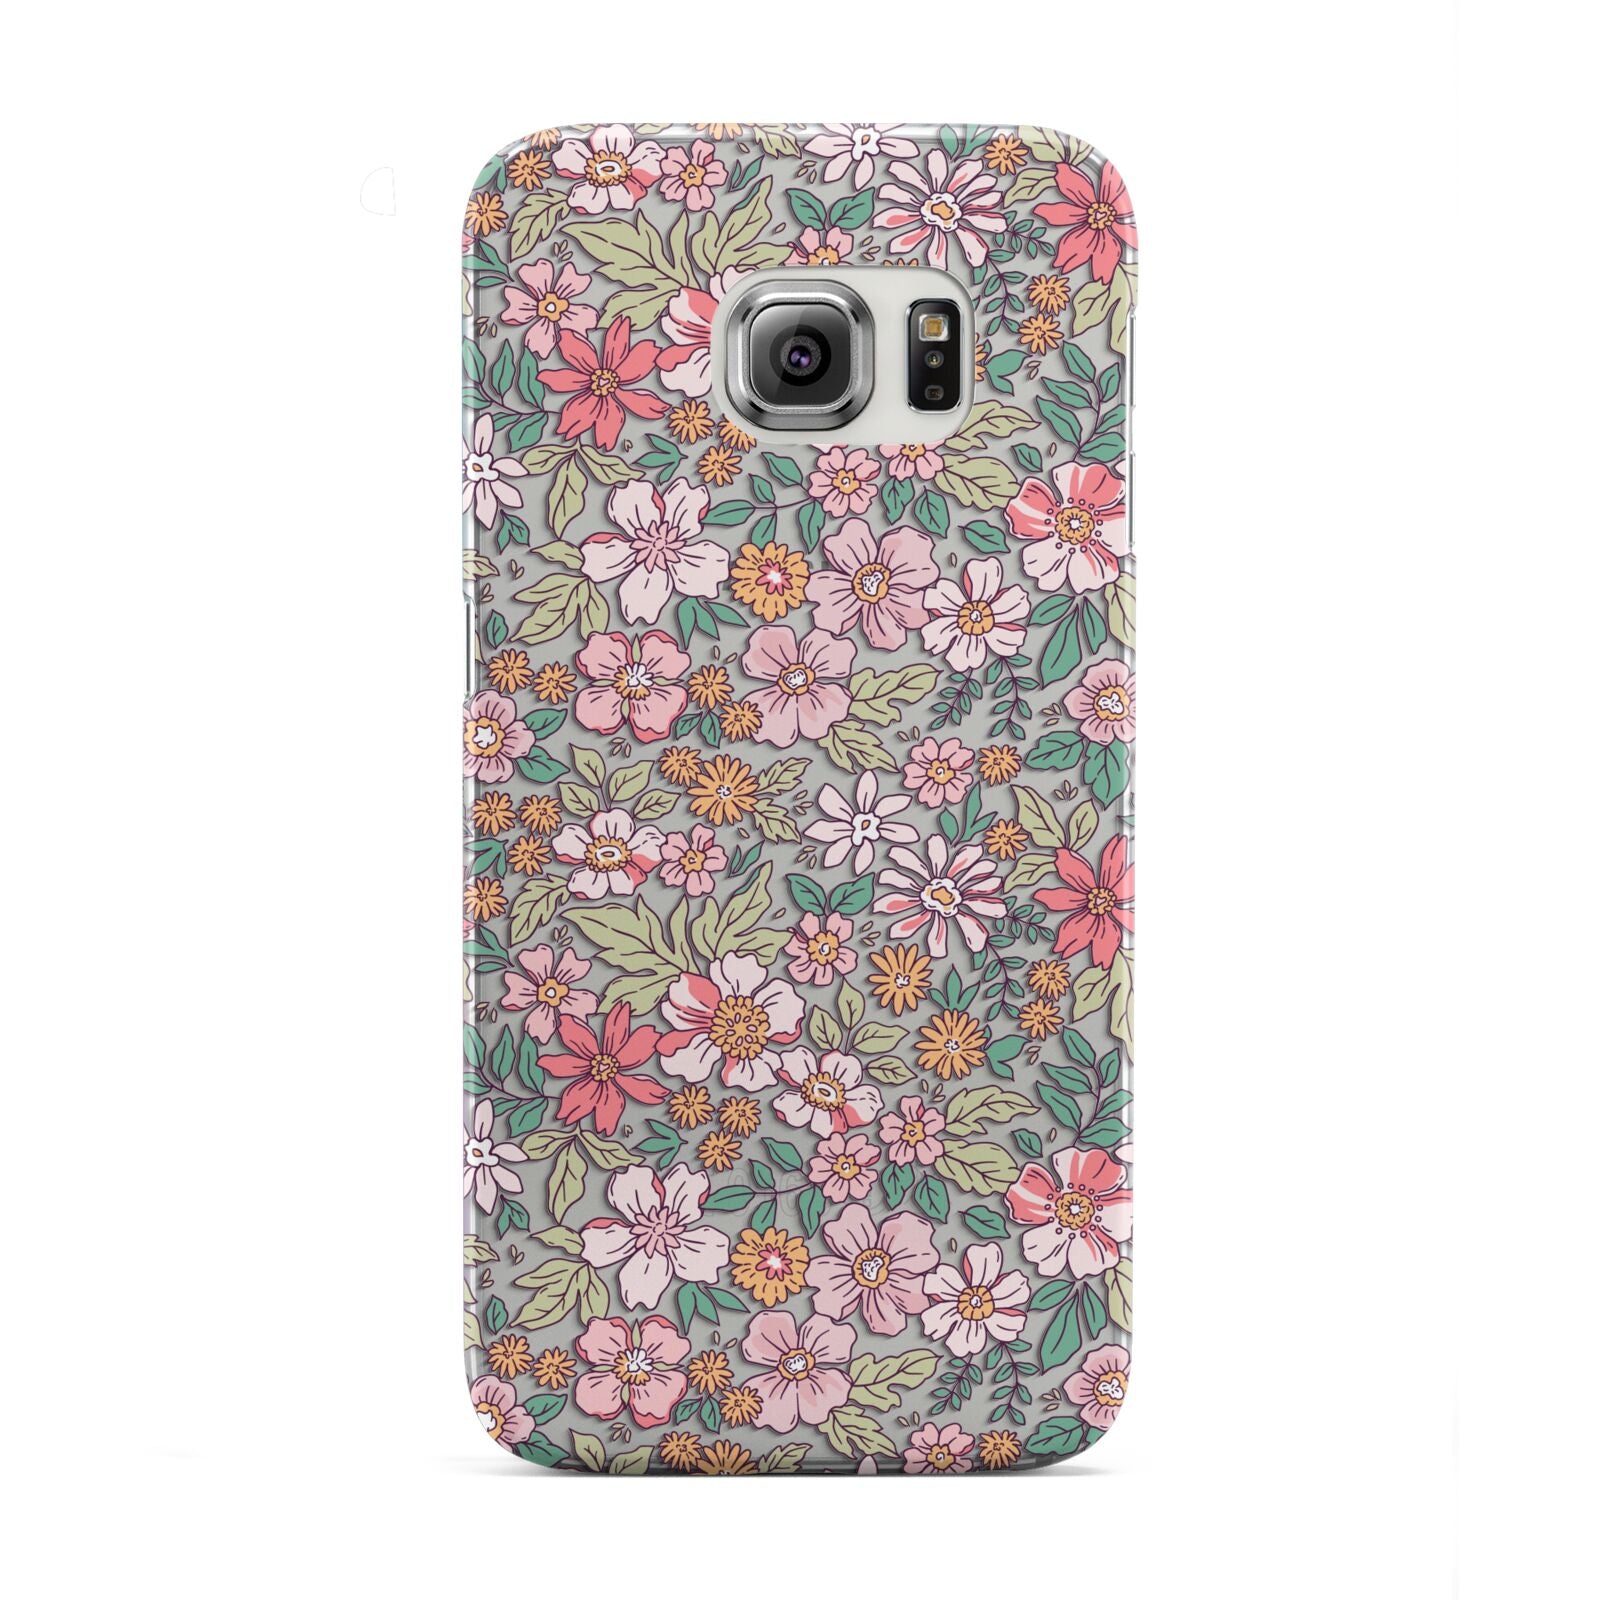 Small Floral Pattern Samsung Galaxy S6 Edge Case